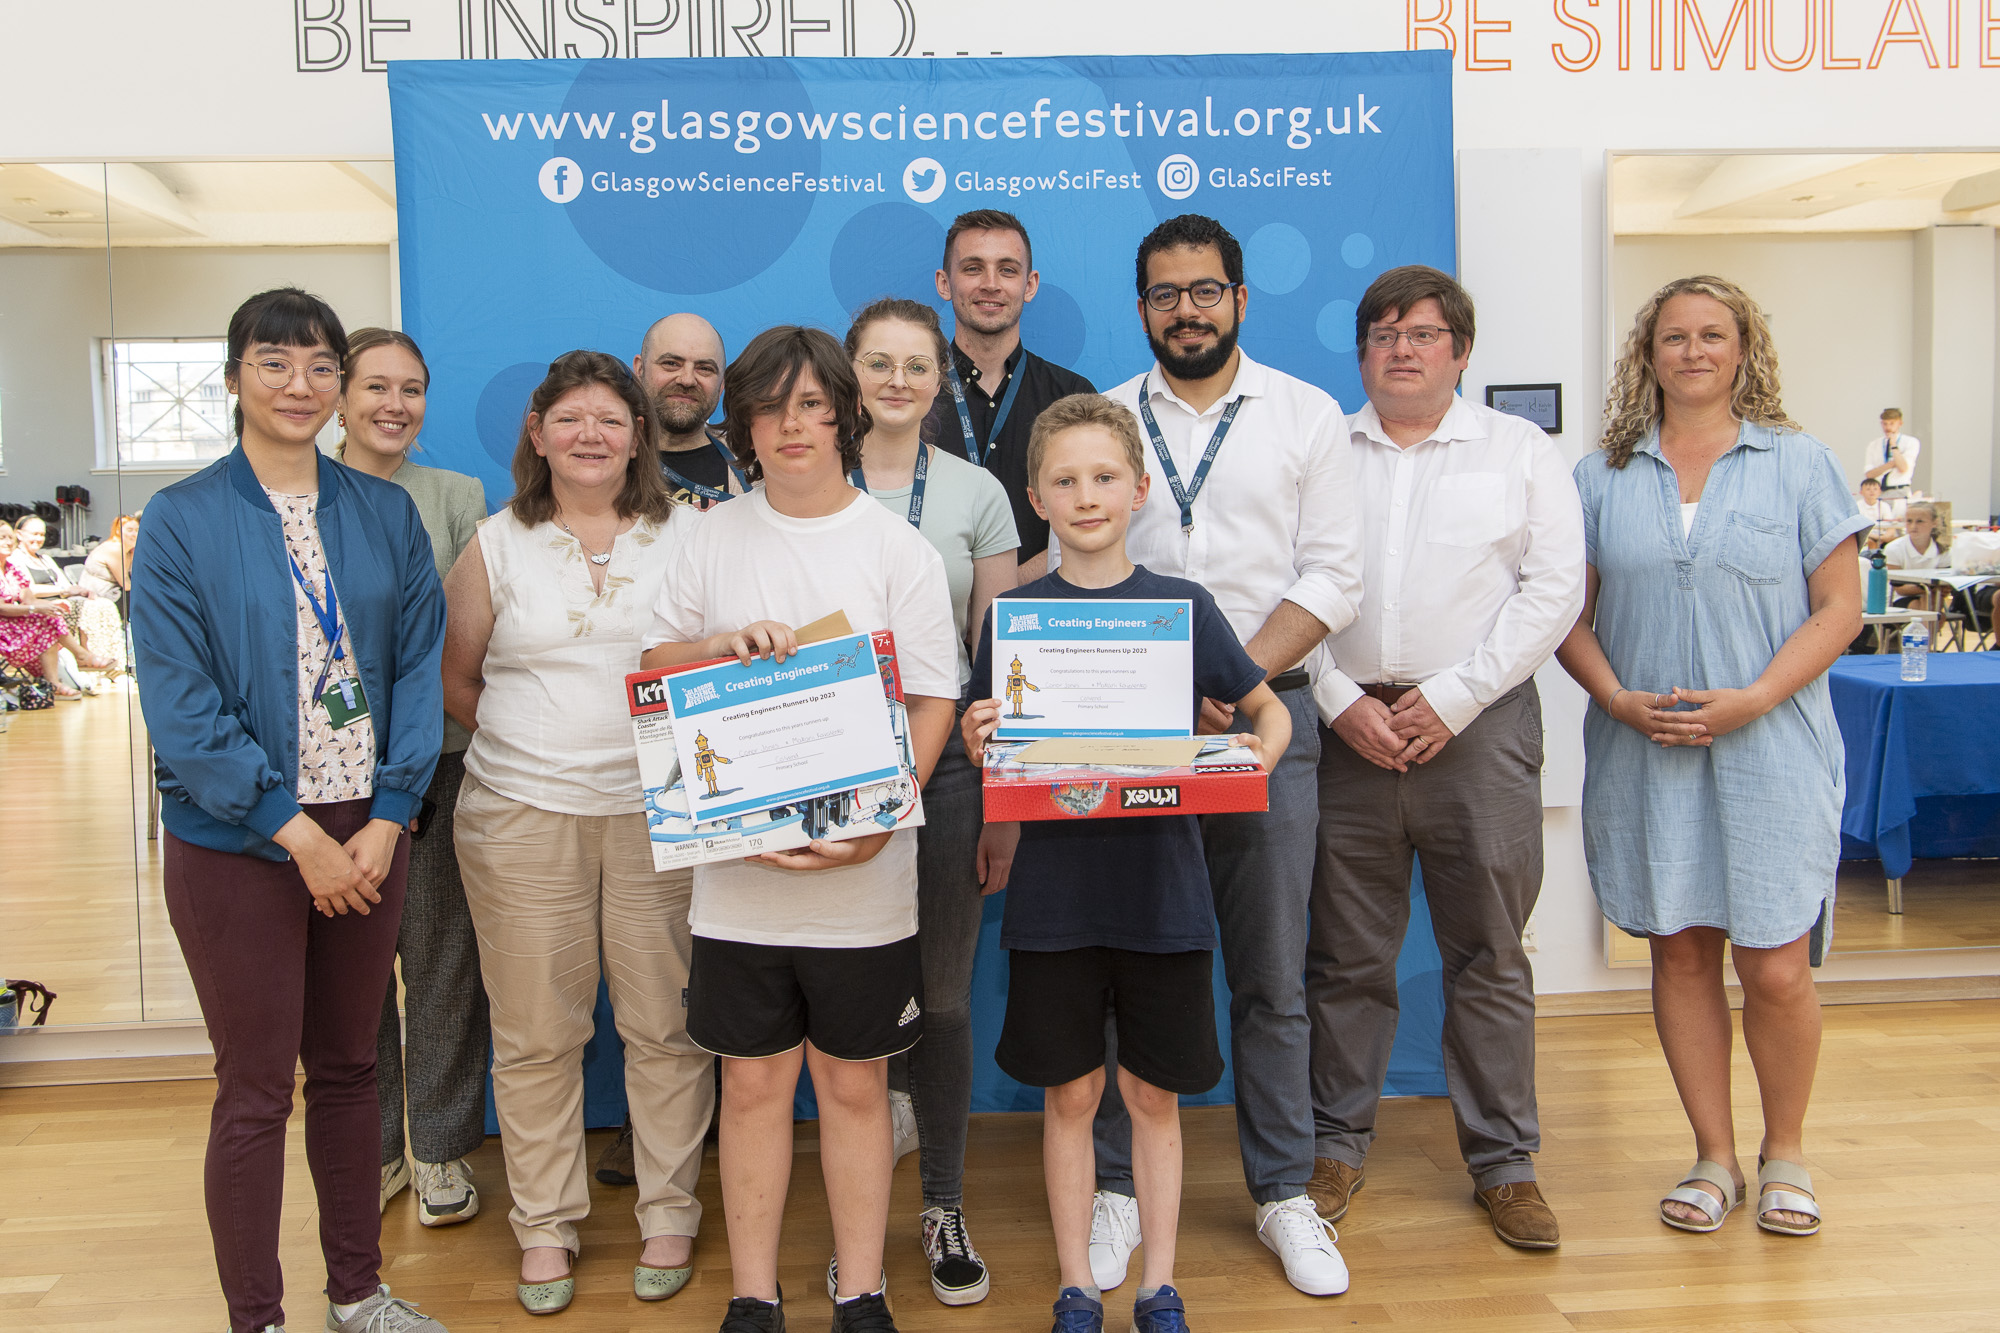 Photograph showing the runners up holding their prizes. Behind them are the eight judges and the Glasgow Science Festival director.